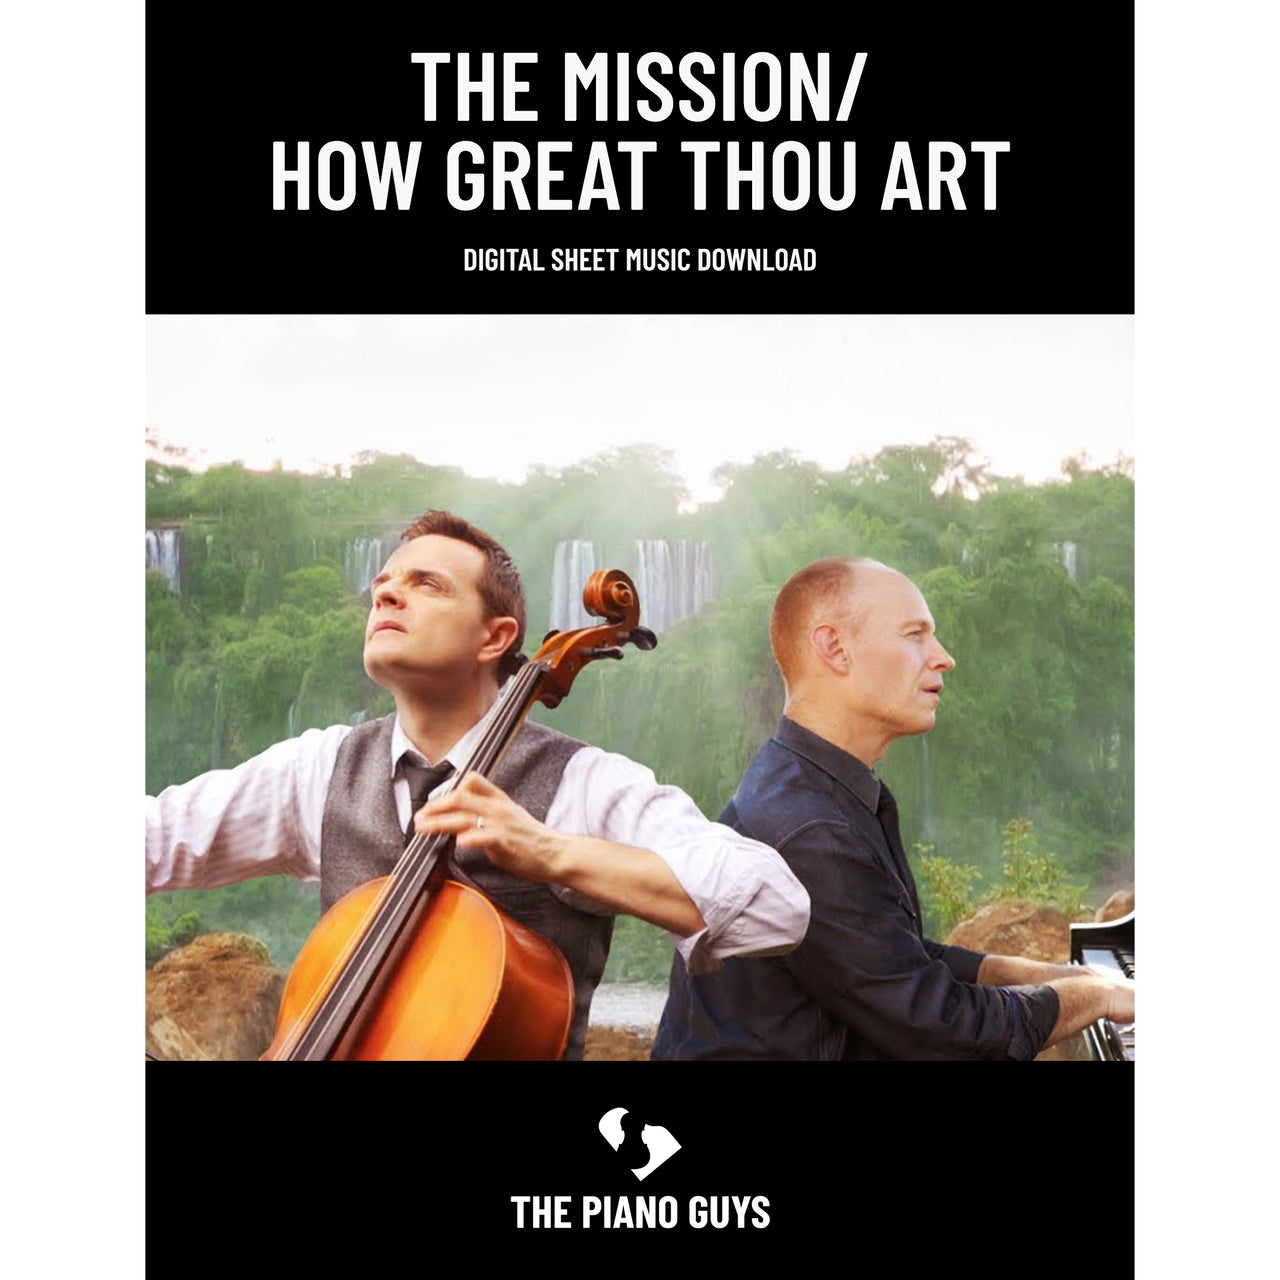 "The Mission / How Great Thou Art" - Sheet Music Single (PDF DOWNLOAD ONLY)